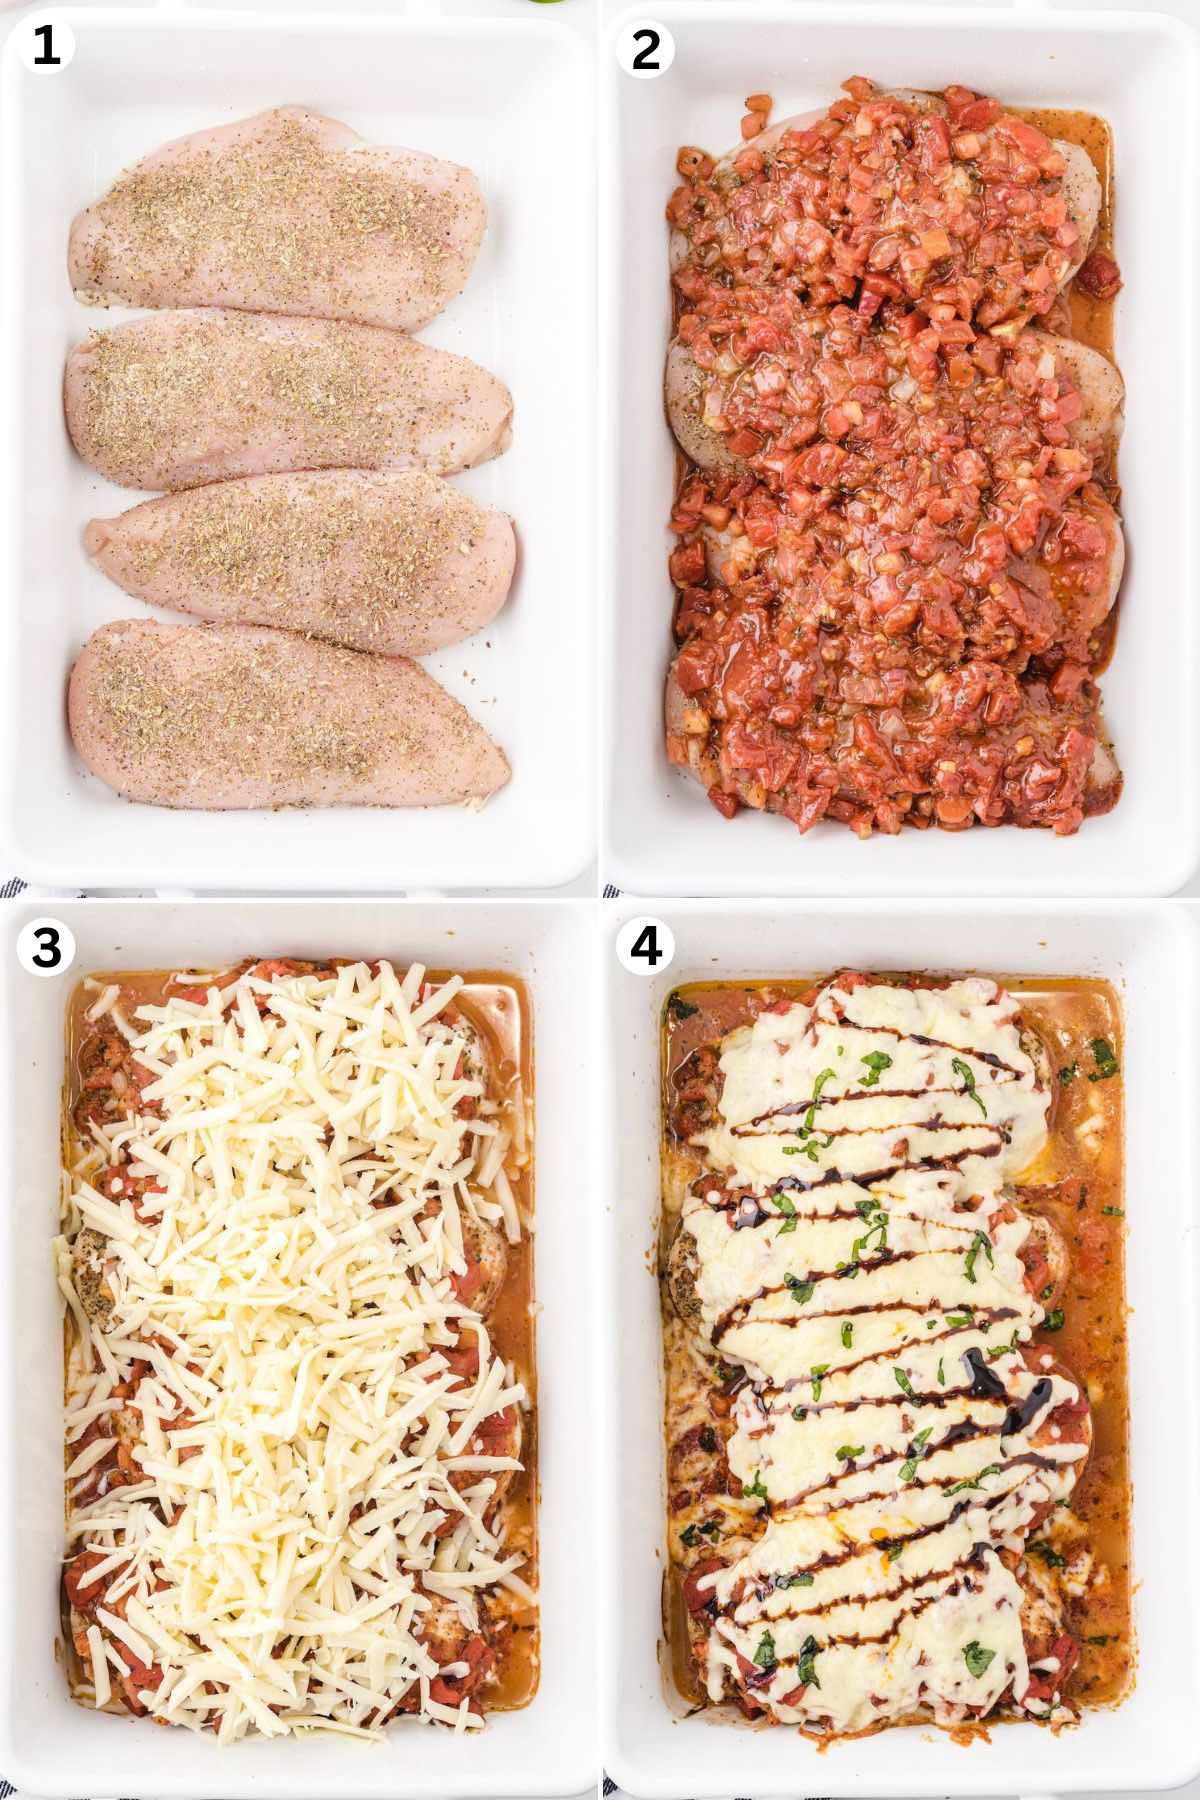 place chicken breasts in baking dish. top with bruschetta and shredded cheese. bake and drizzle with balsamic oil.